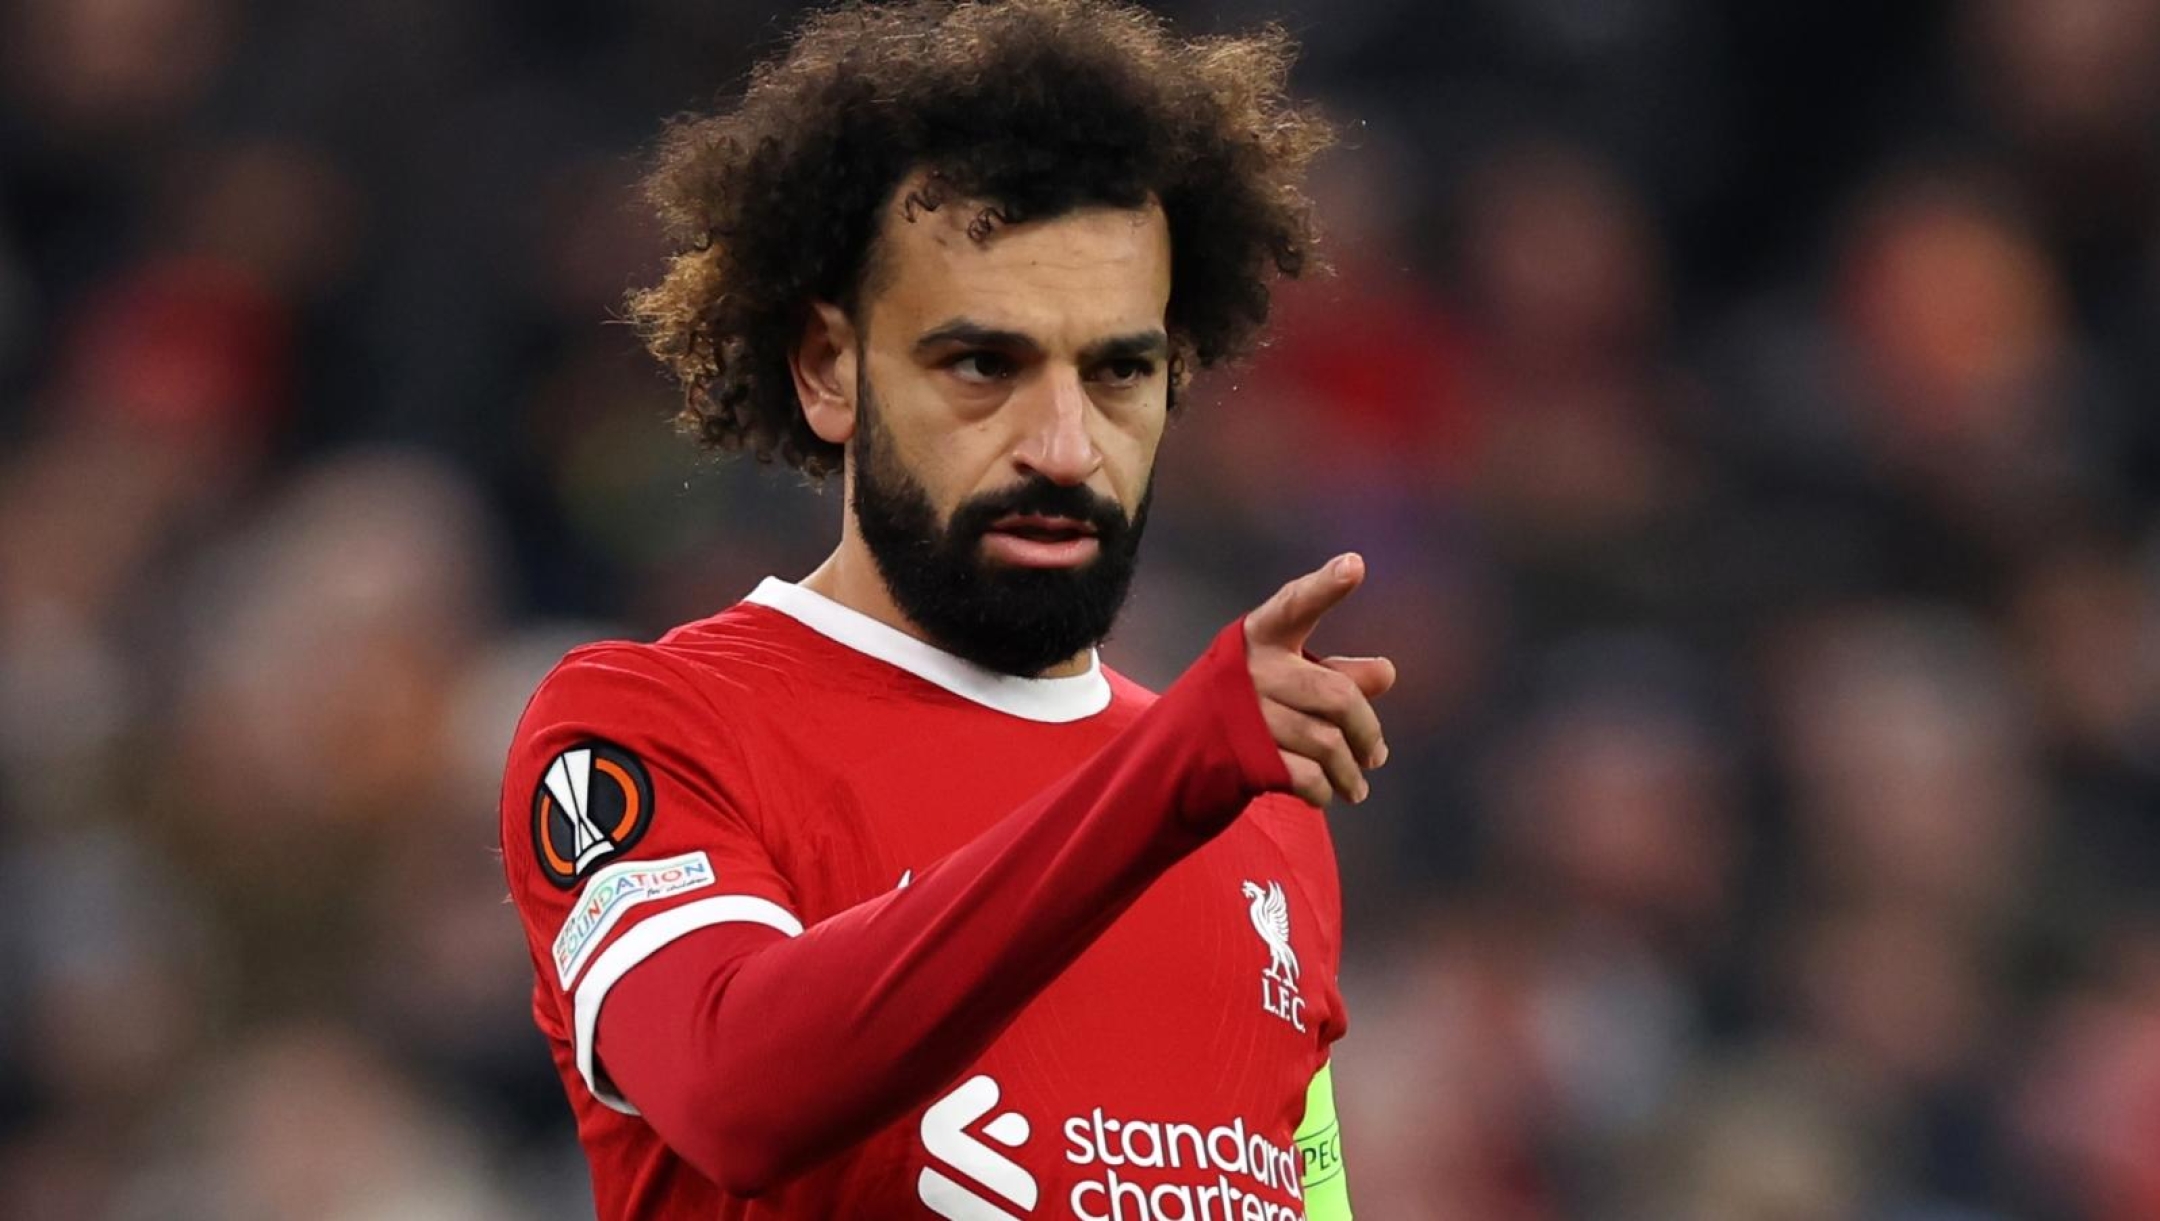 LIVERPOOL, ENGLAND - NOVEMBER 30: Mohamed Salah of Liverpool during the UEFA Europa League match between Liverpool FC and LASK at Anfield on November 30, 2023 in Liverpool, England. (Photo by Catherine Ivill/Getty Images)